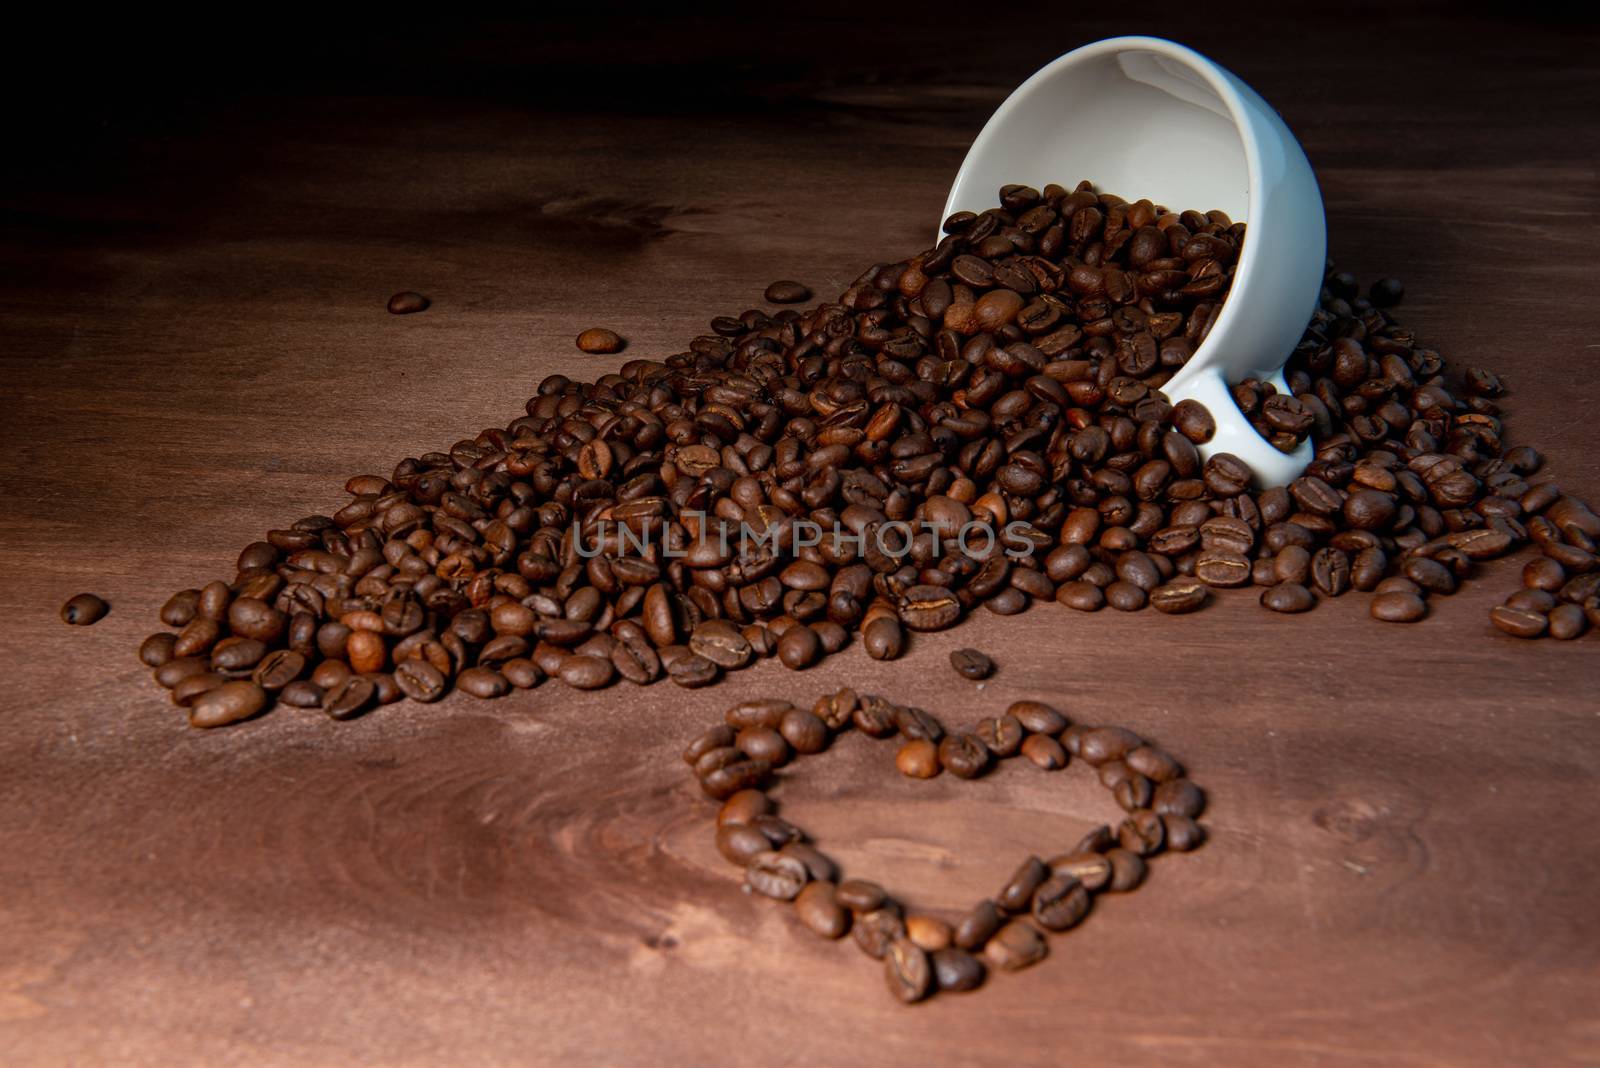 Coffee bean pouring out of a white mug on wooden table, Heart shape from coffee beans in the foreground - image